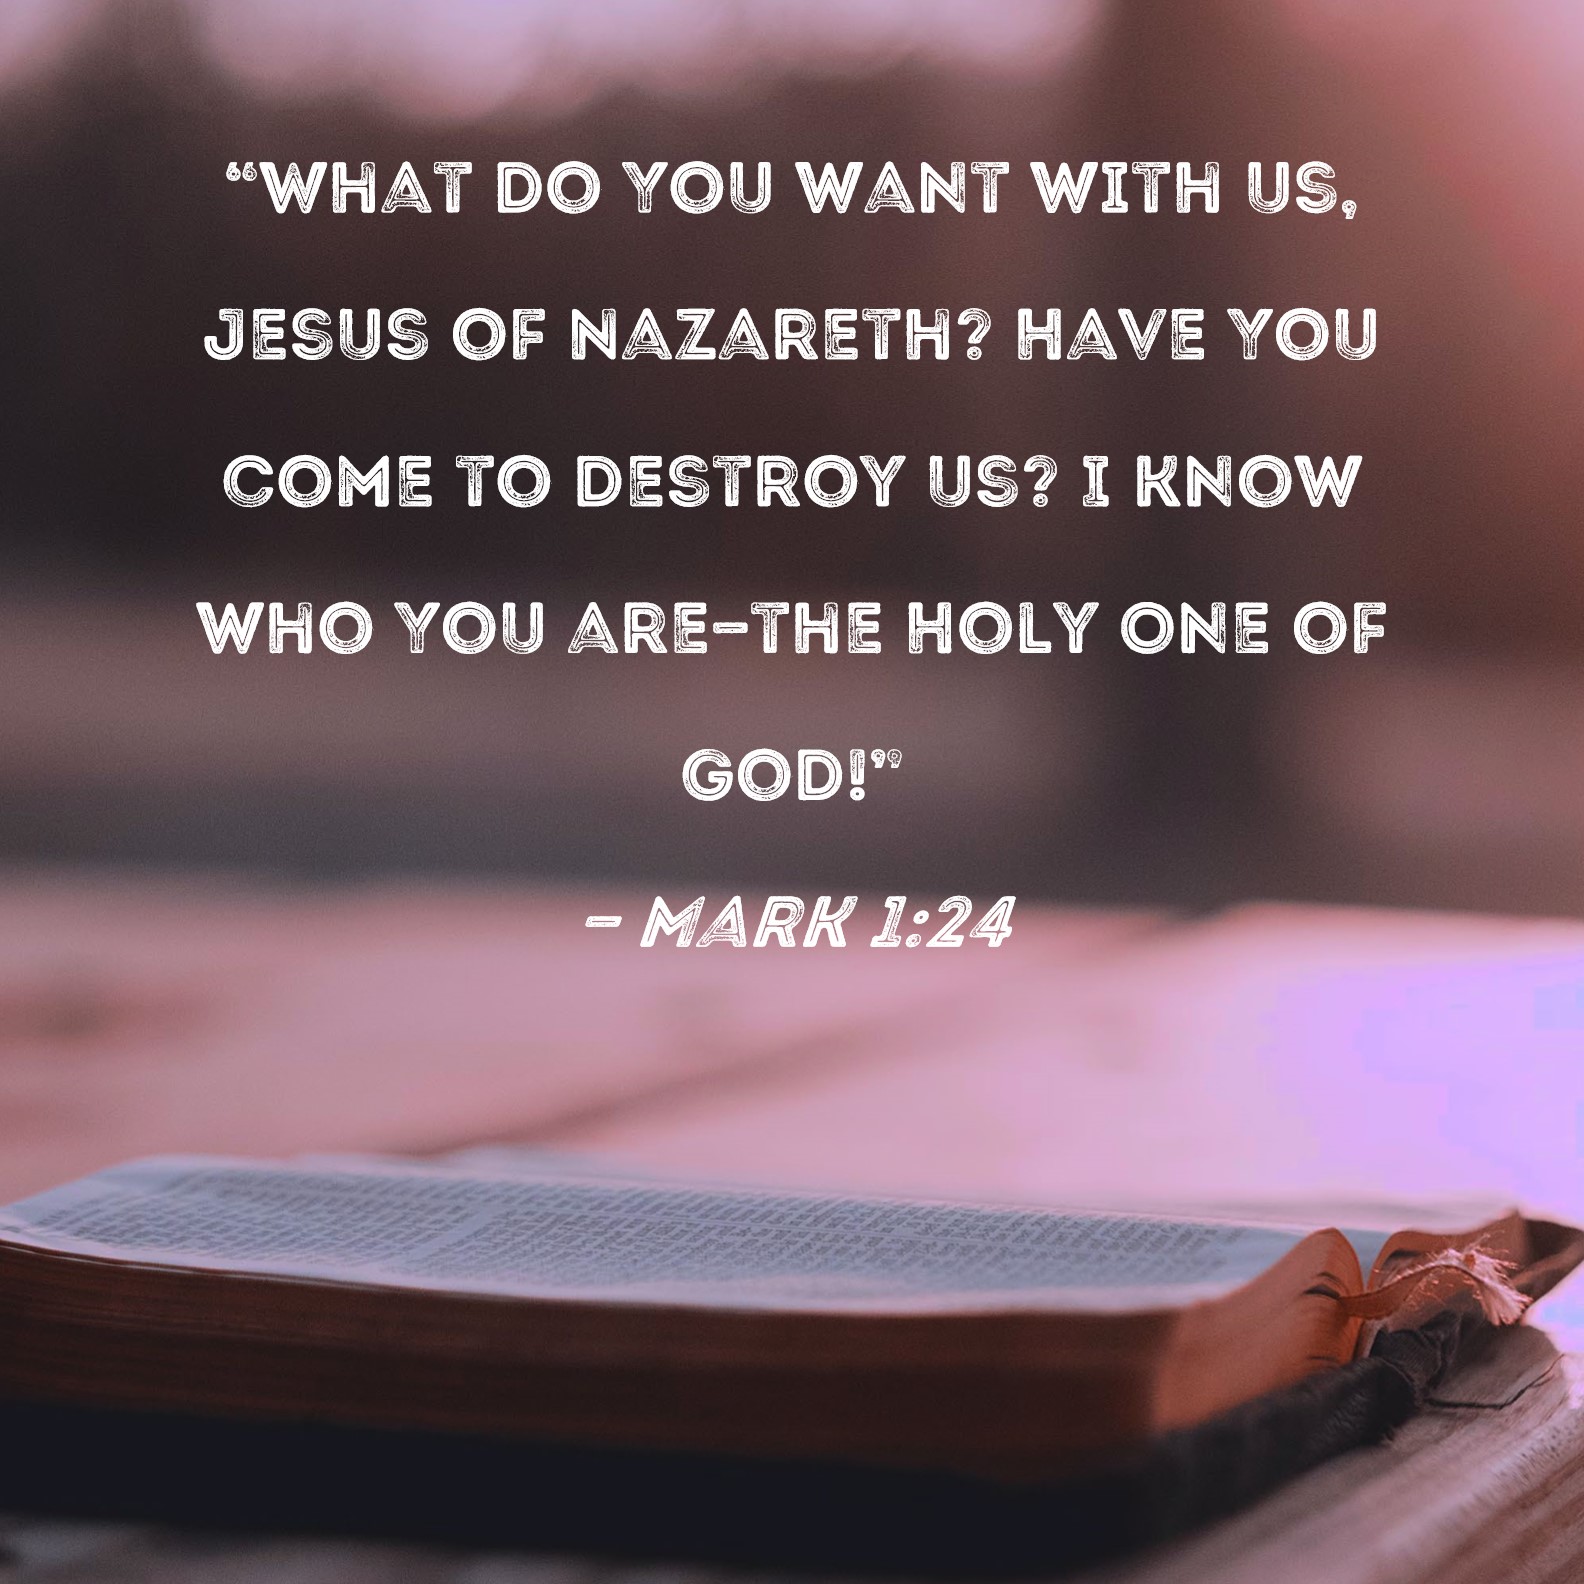 Mark 1:24 "What do You want with us, Jesus of Nazareth? Have You come to  destroy us? I know who You are--the Holy One of God!"